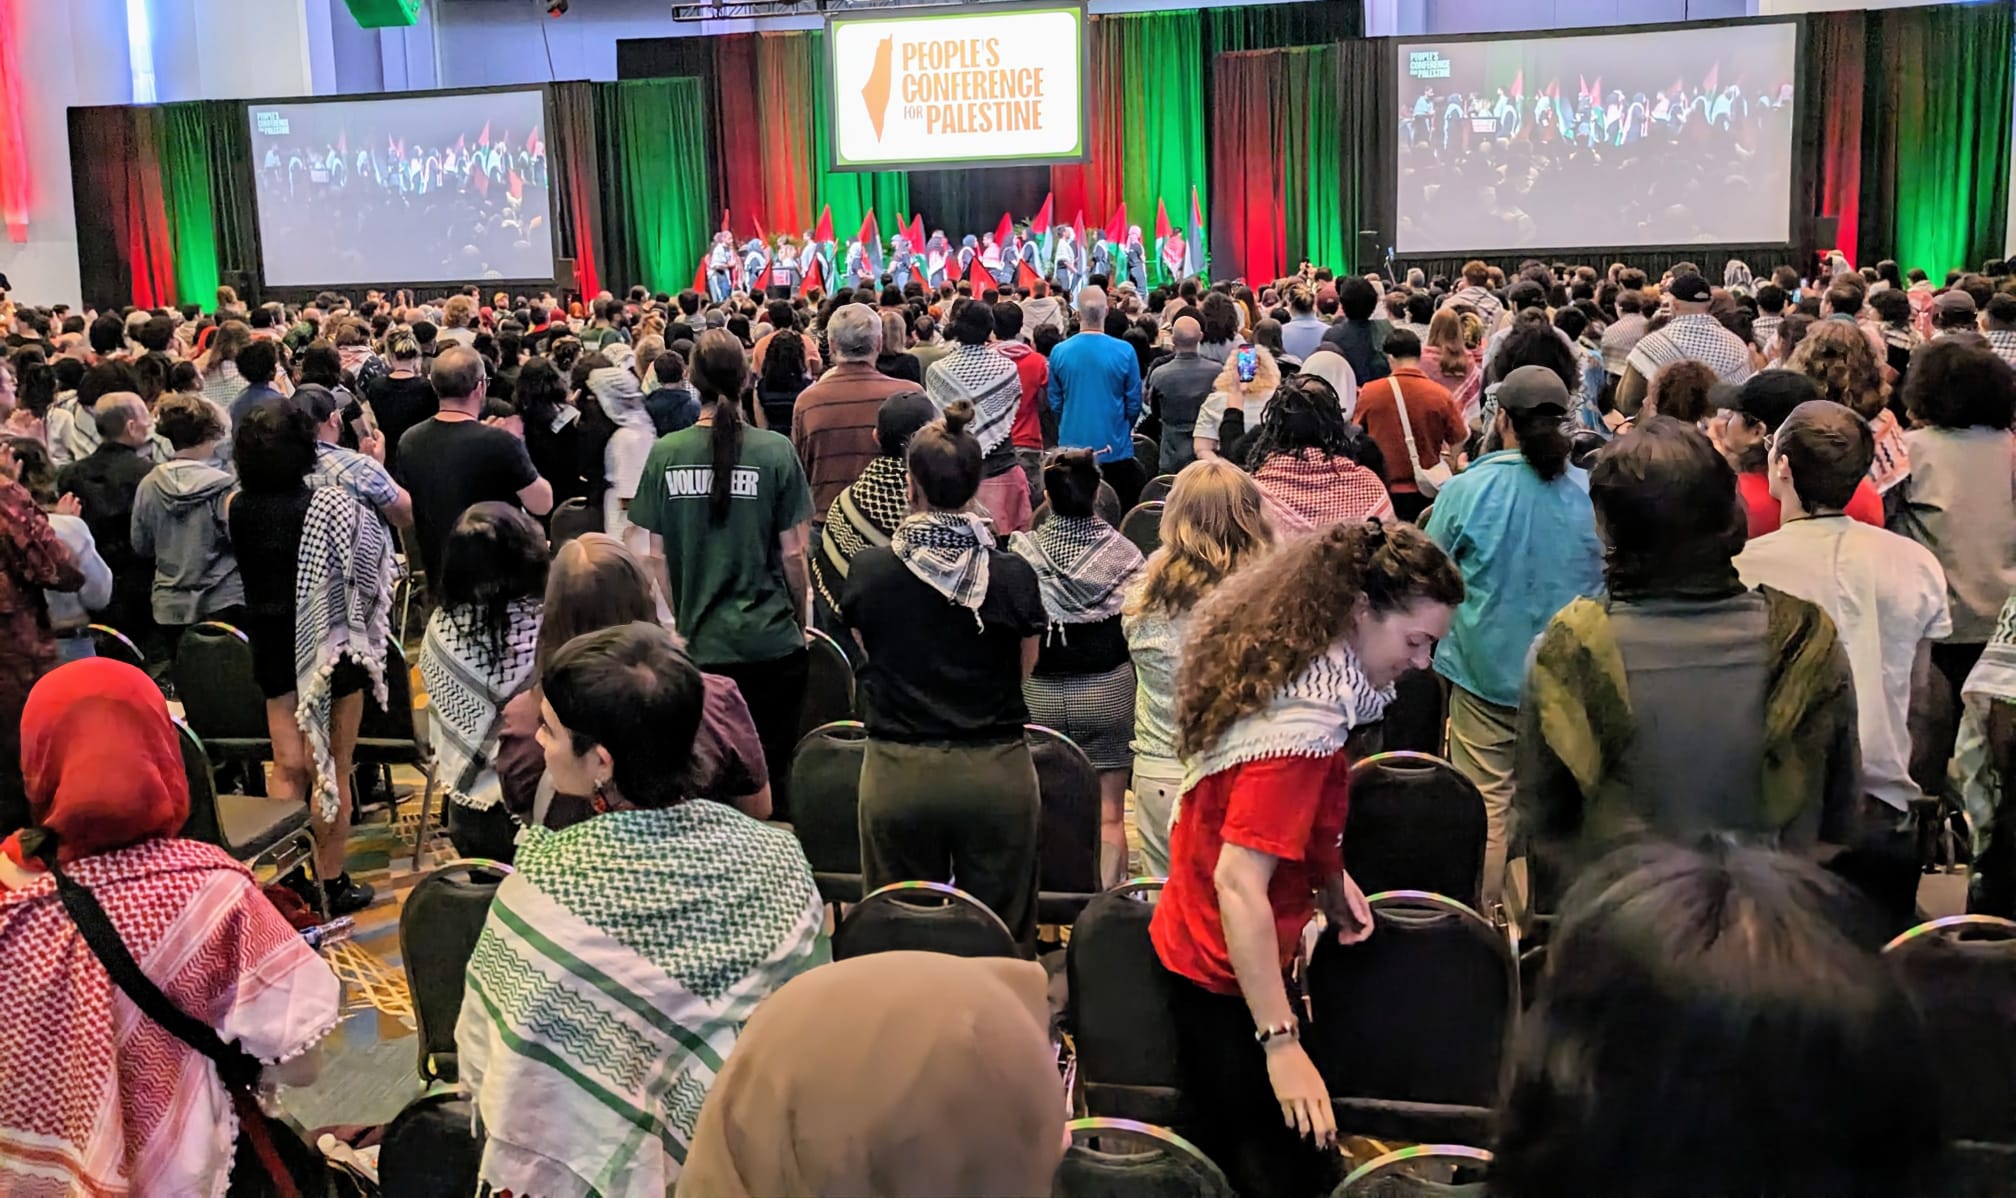 People's Conference for Palestine, Detroit